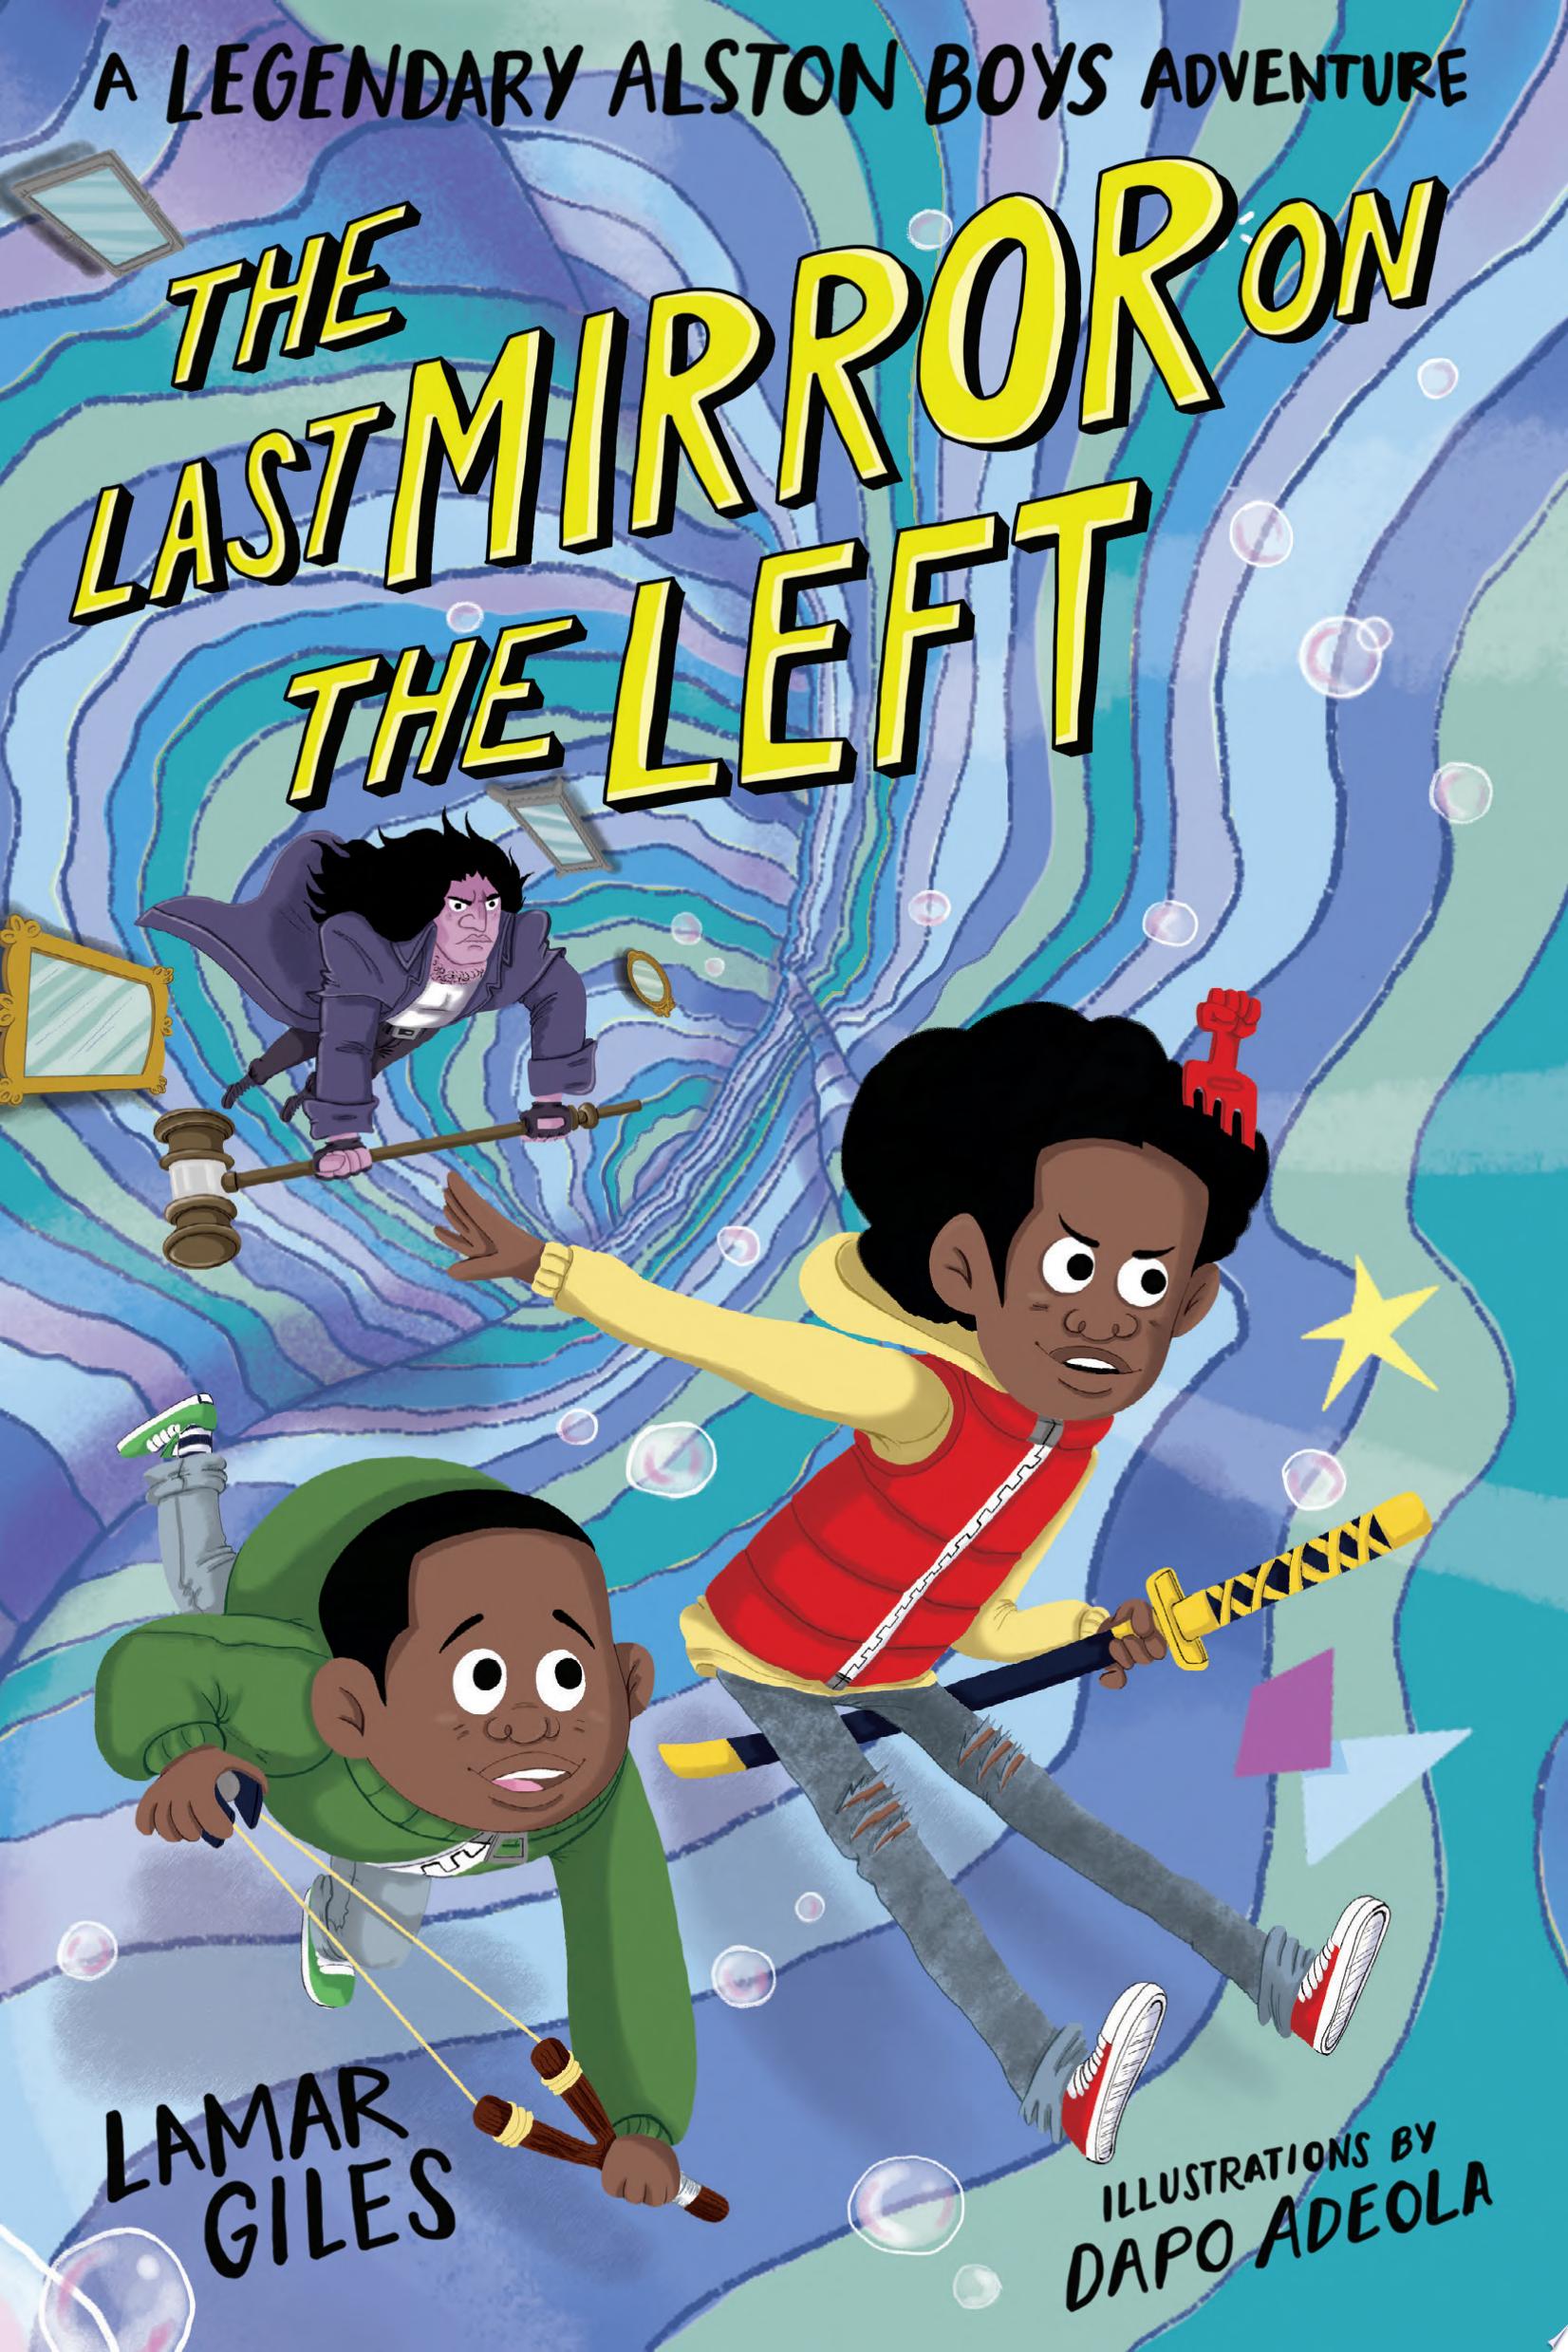 Image for "The Last Mirror on the Left"